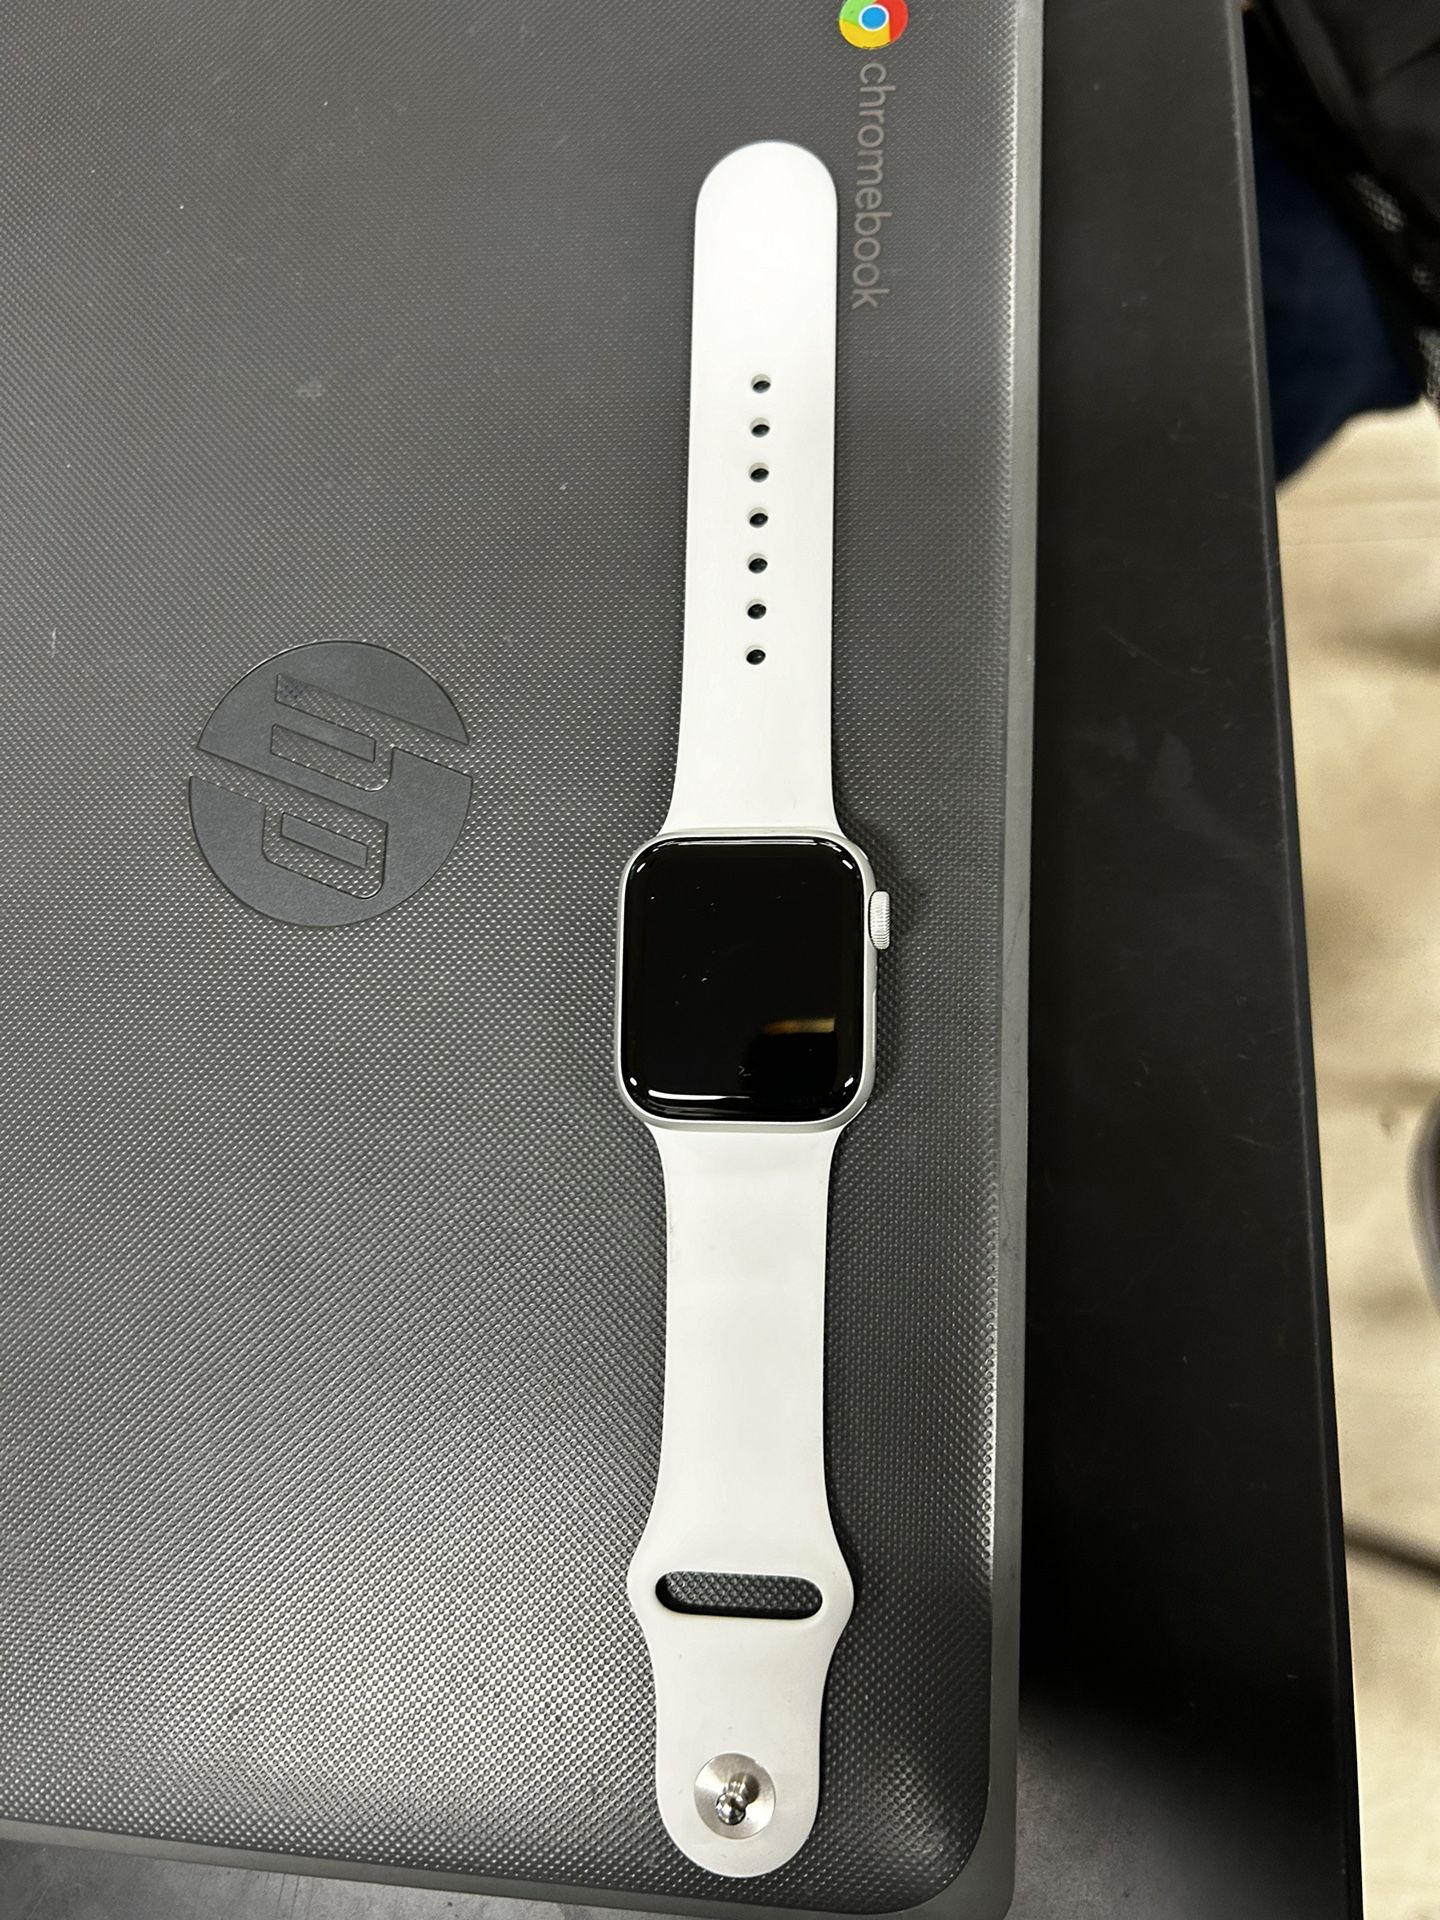 apple watch open but not used